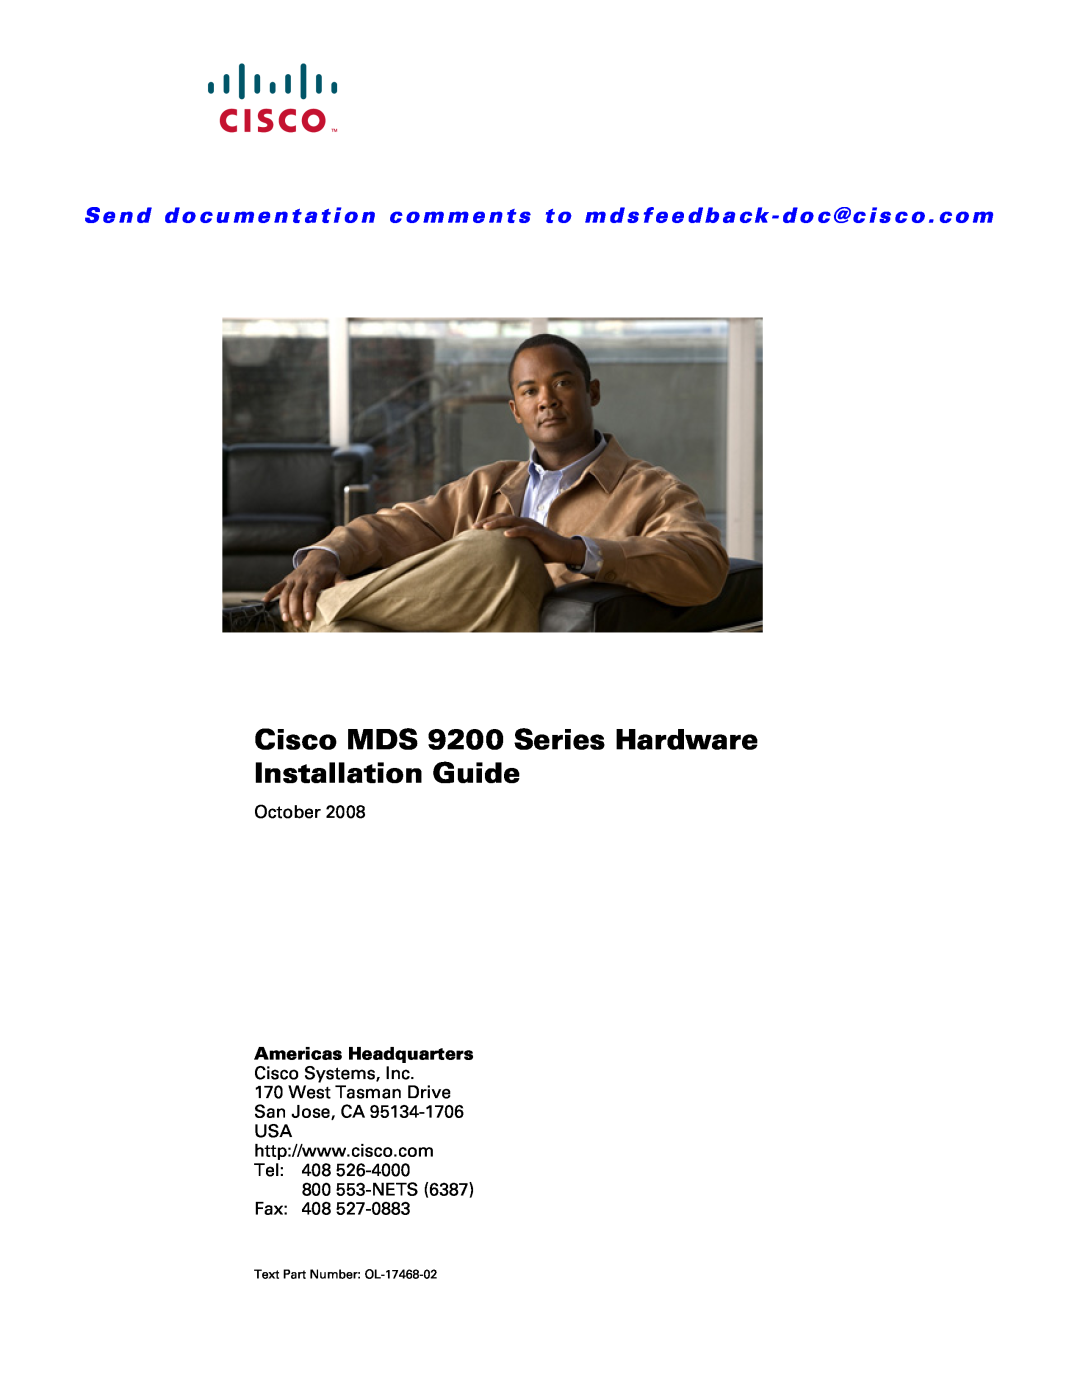 Cisco Systems manual Cisco MDS 9200 Series Hardware Installation Guide, October, 800 553-NETS Fax 408 